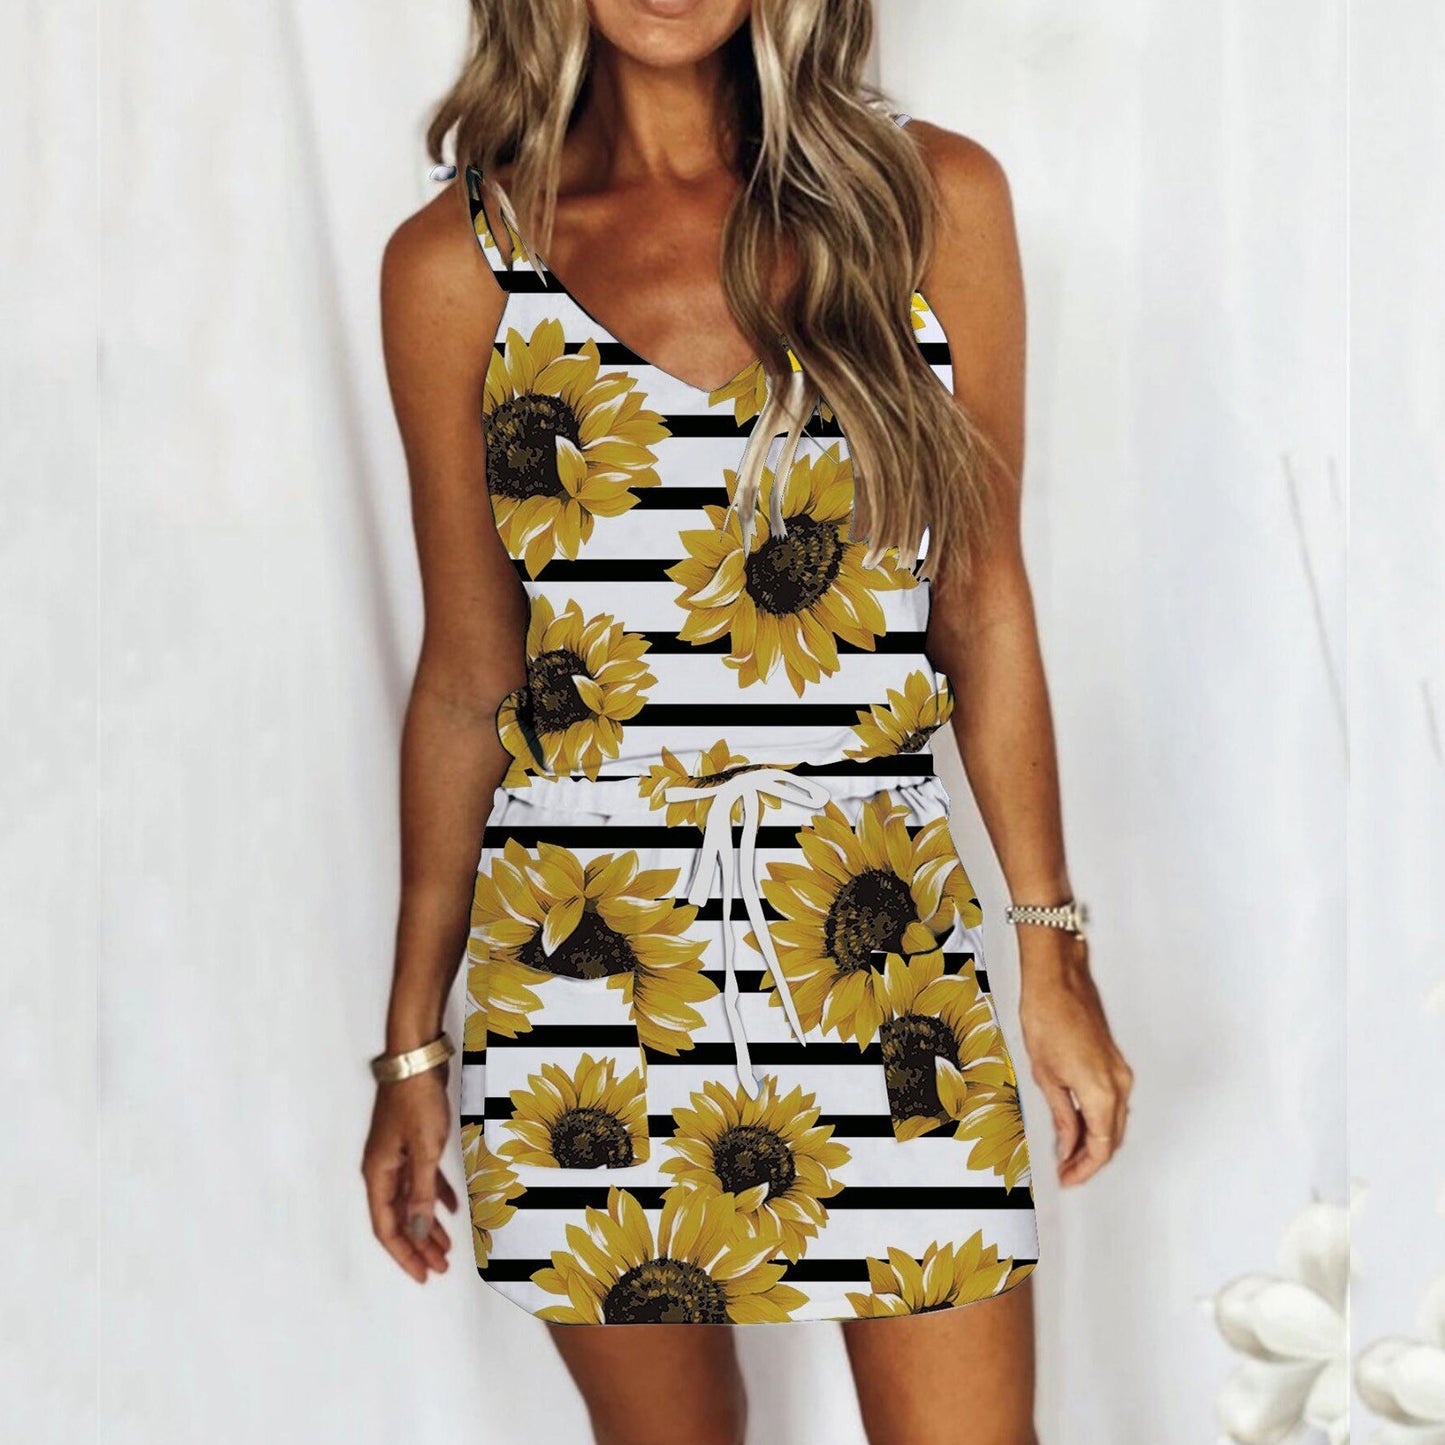 Women's Dress Summer 2021 New Fashion Casual V-neck Sleeveless Strap Open Back Sexy Patch Multicolor Print Dress Elegant Ladies